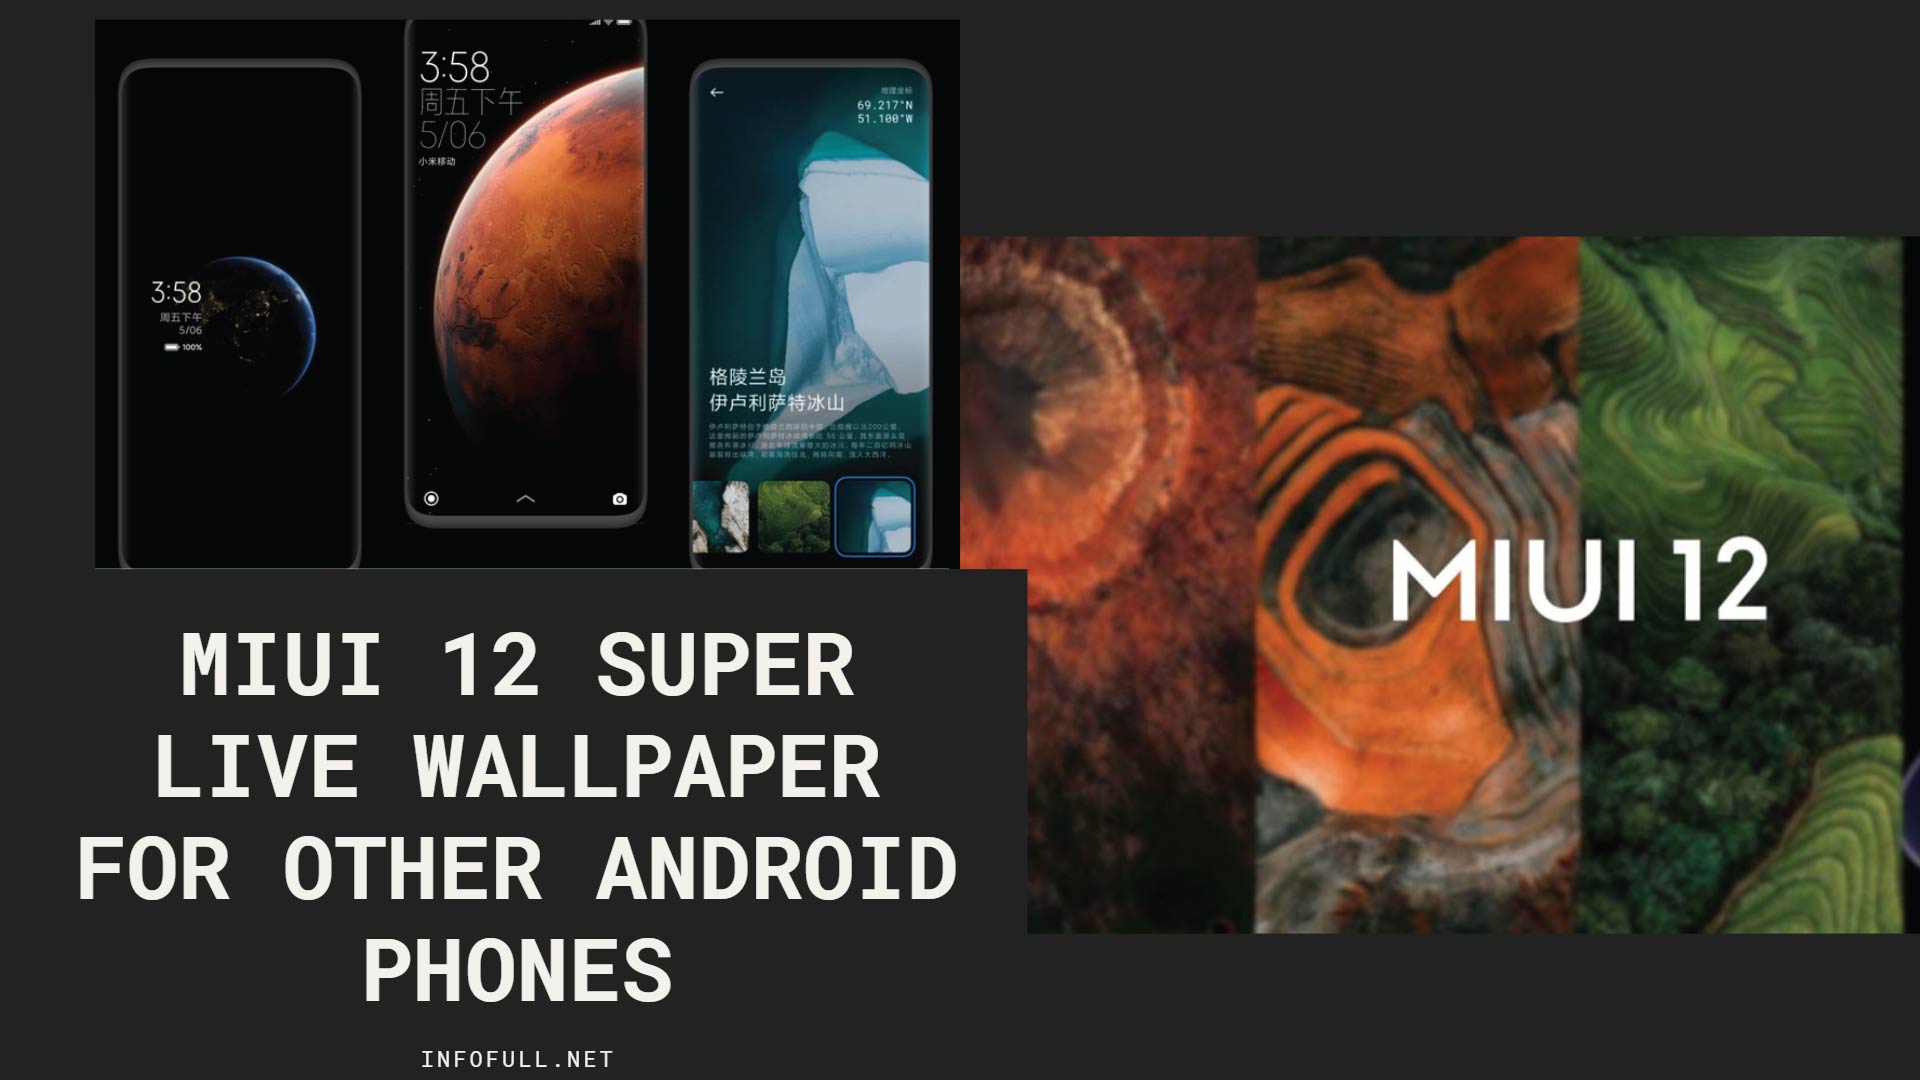 How to Install MIUI 12 Super Live Wallpapers on Other Android Phones